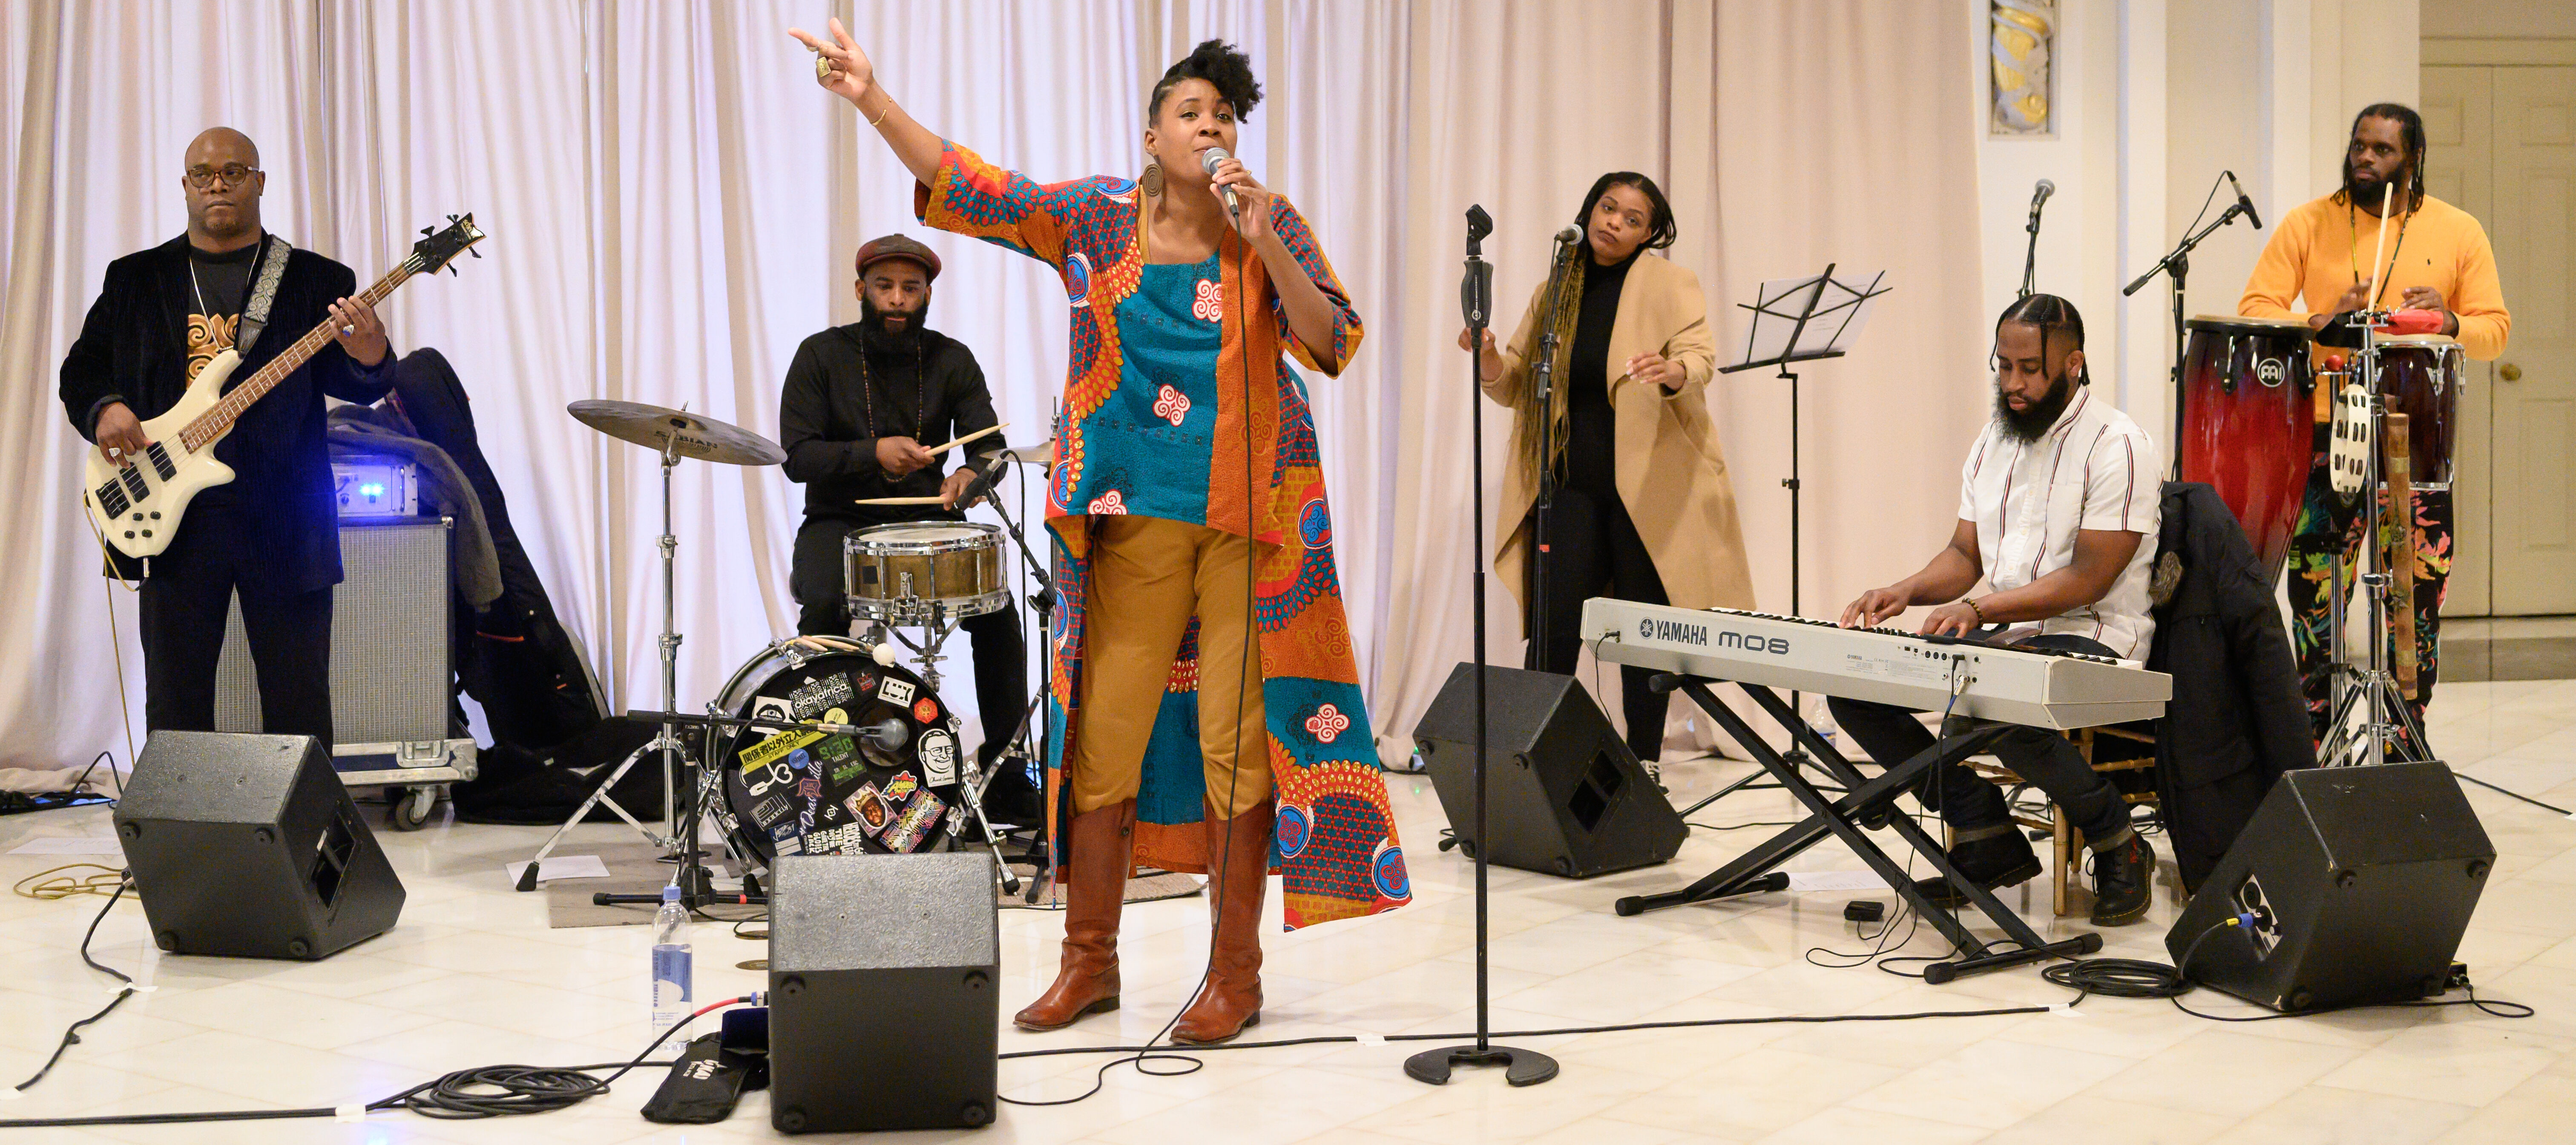 A medium skin-toned adult woman wearing colorful clothing sings into a microphone while a medley of musicians play behind her.